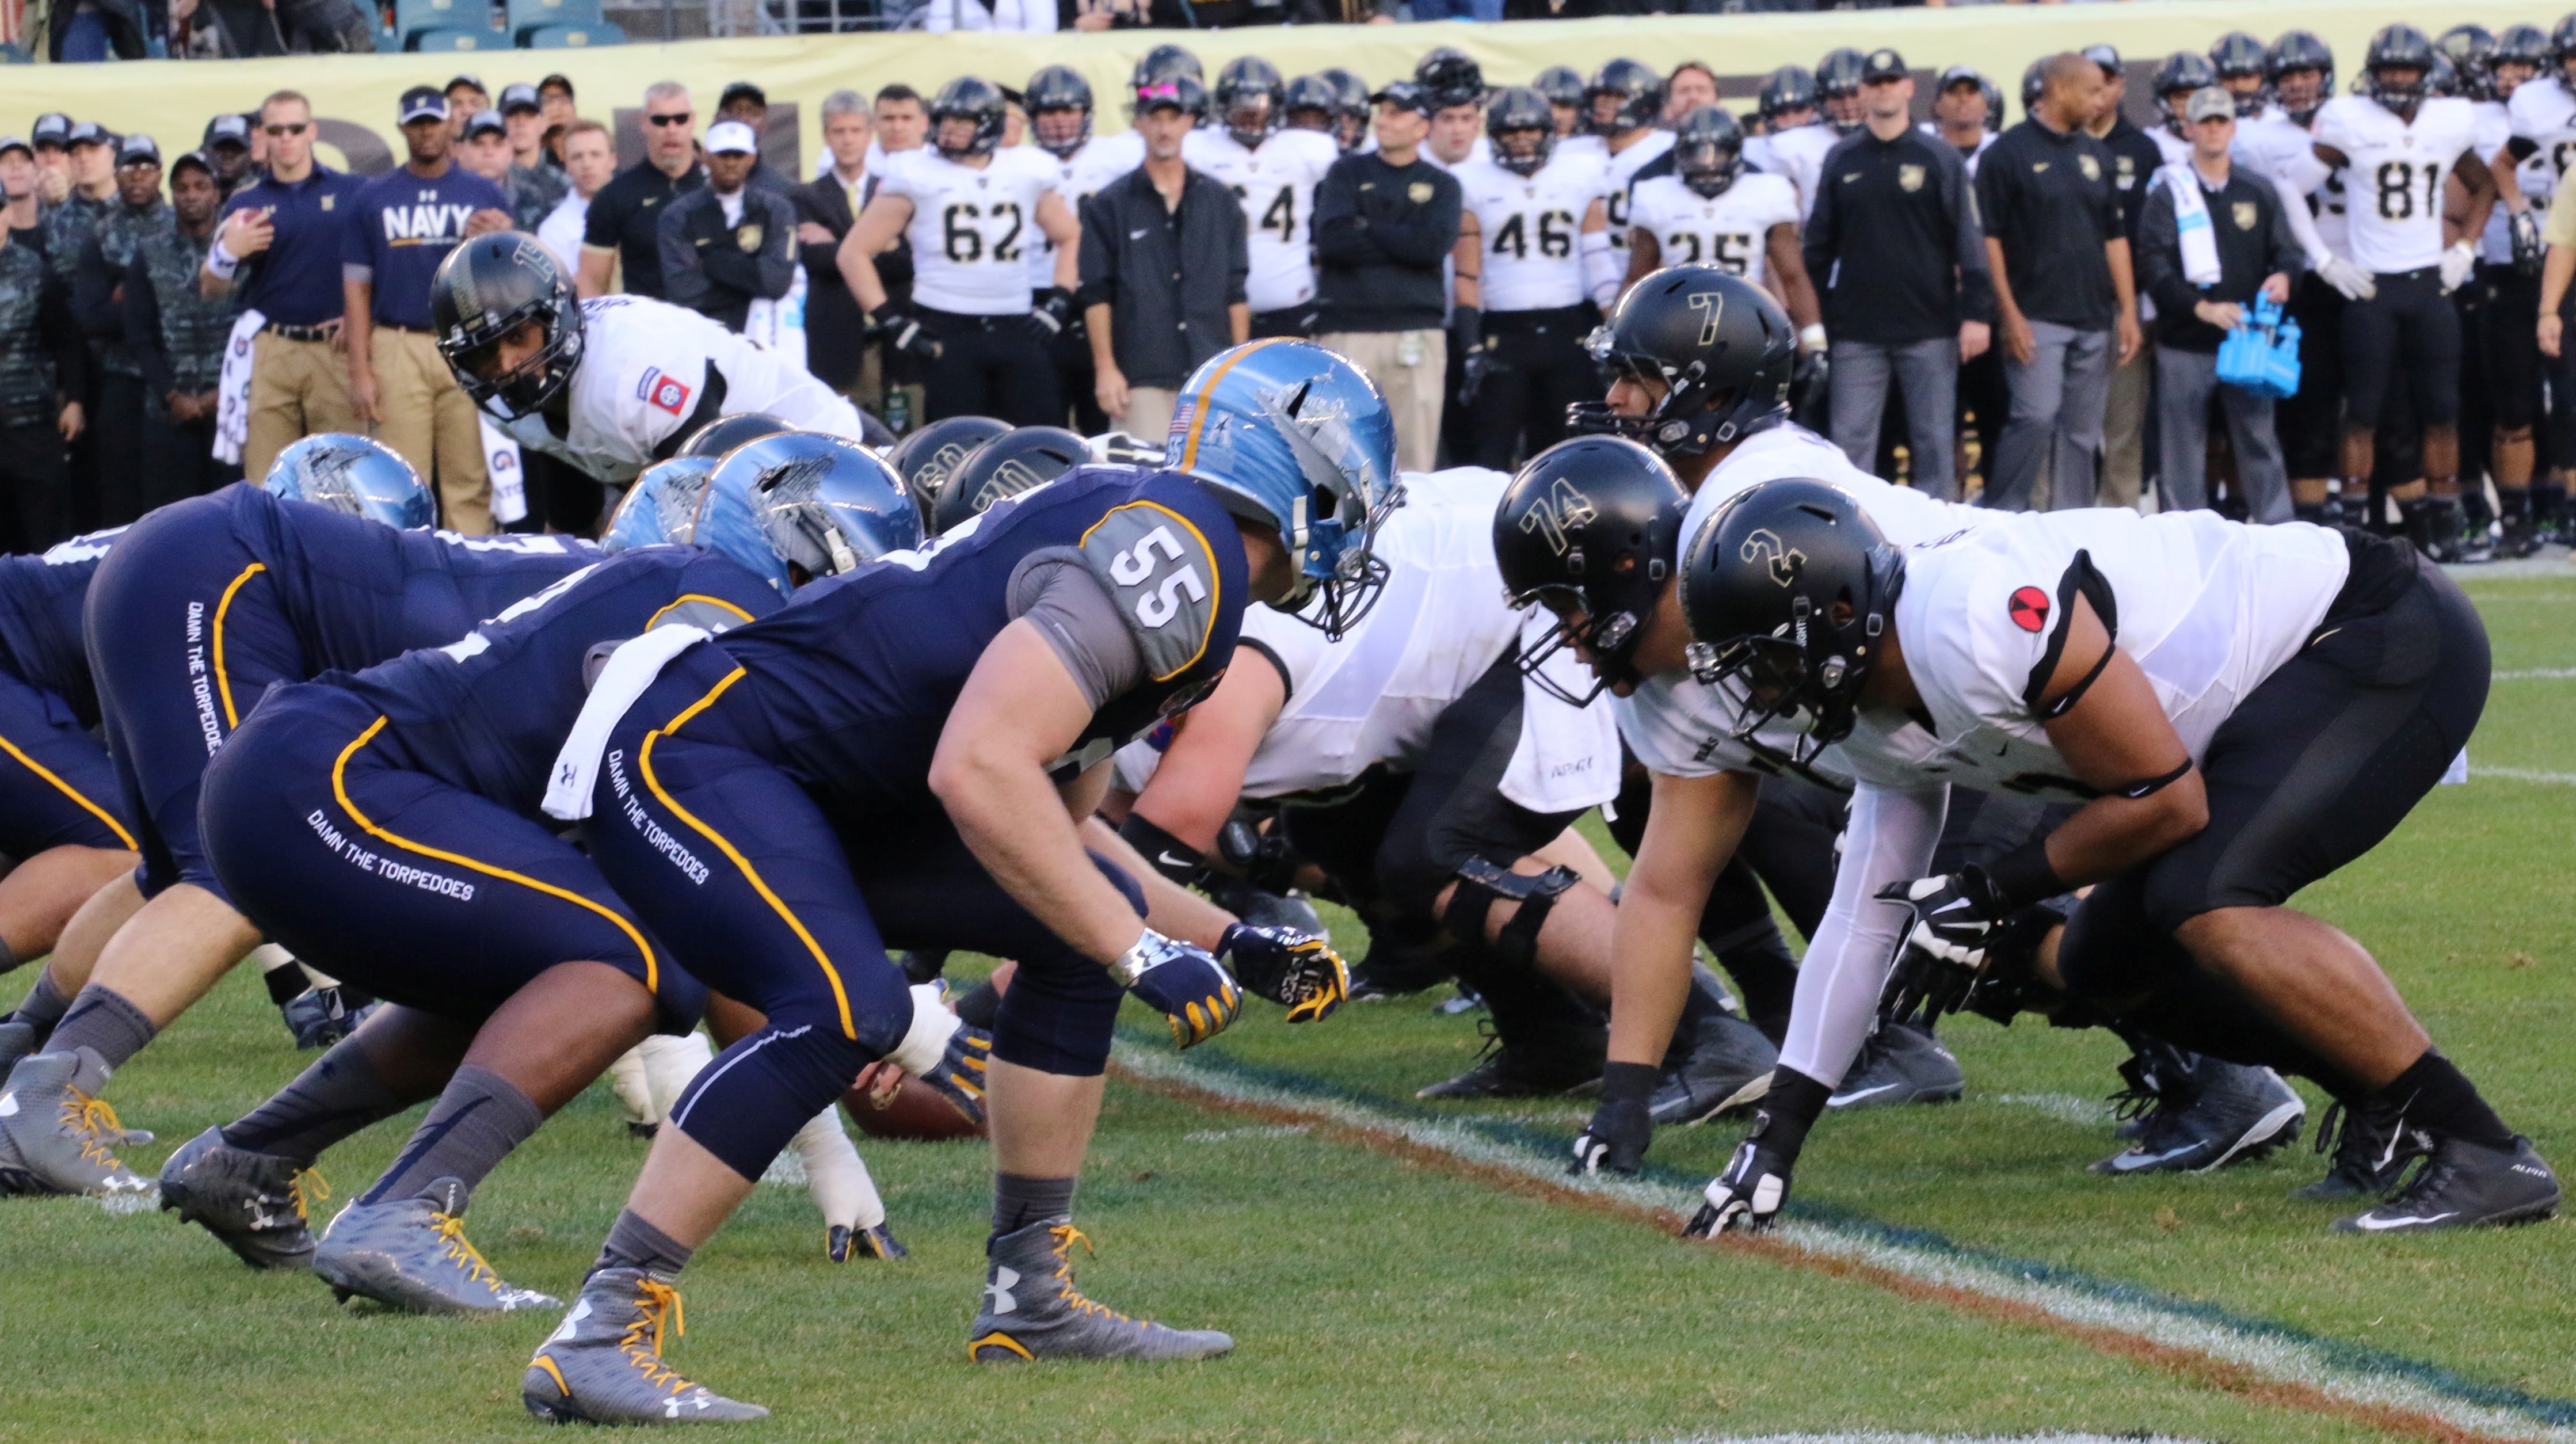 Line of Scrimmage during Army-Navy Game